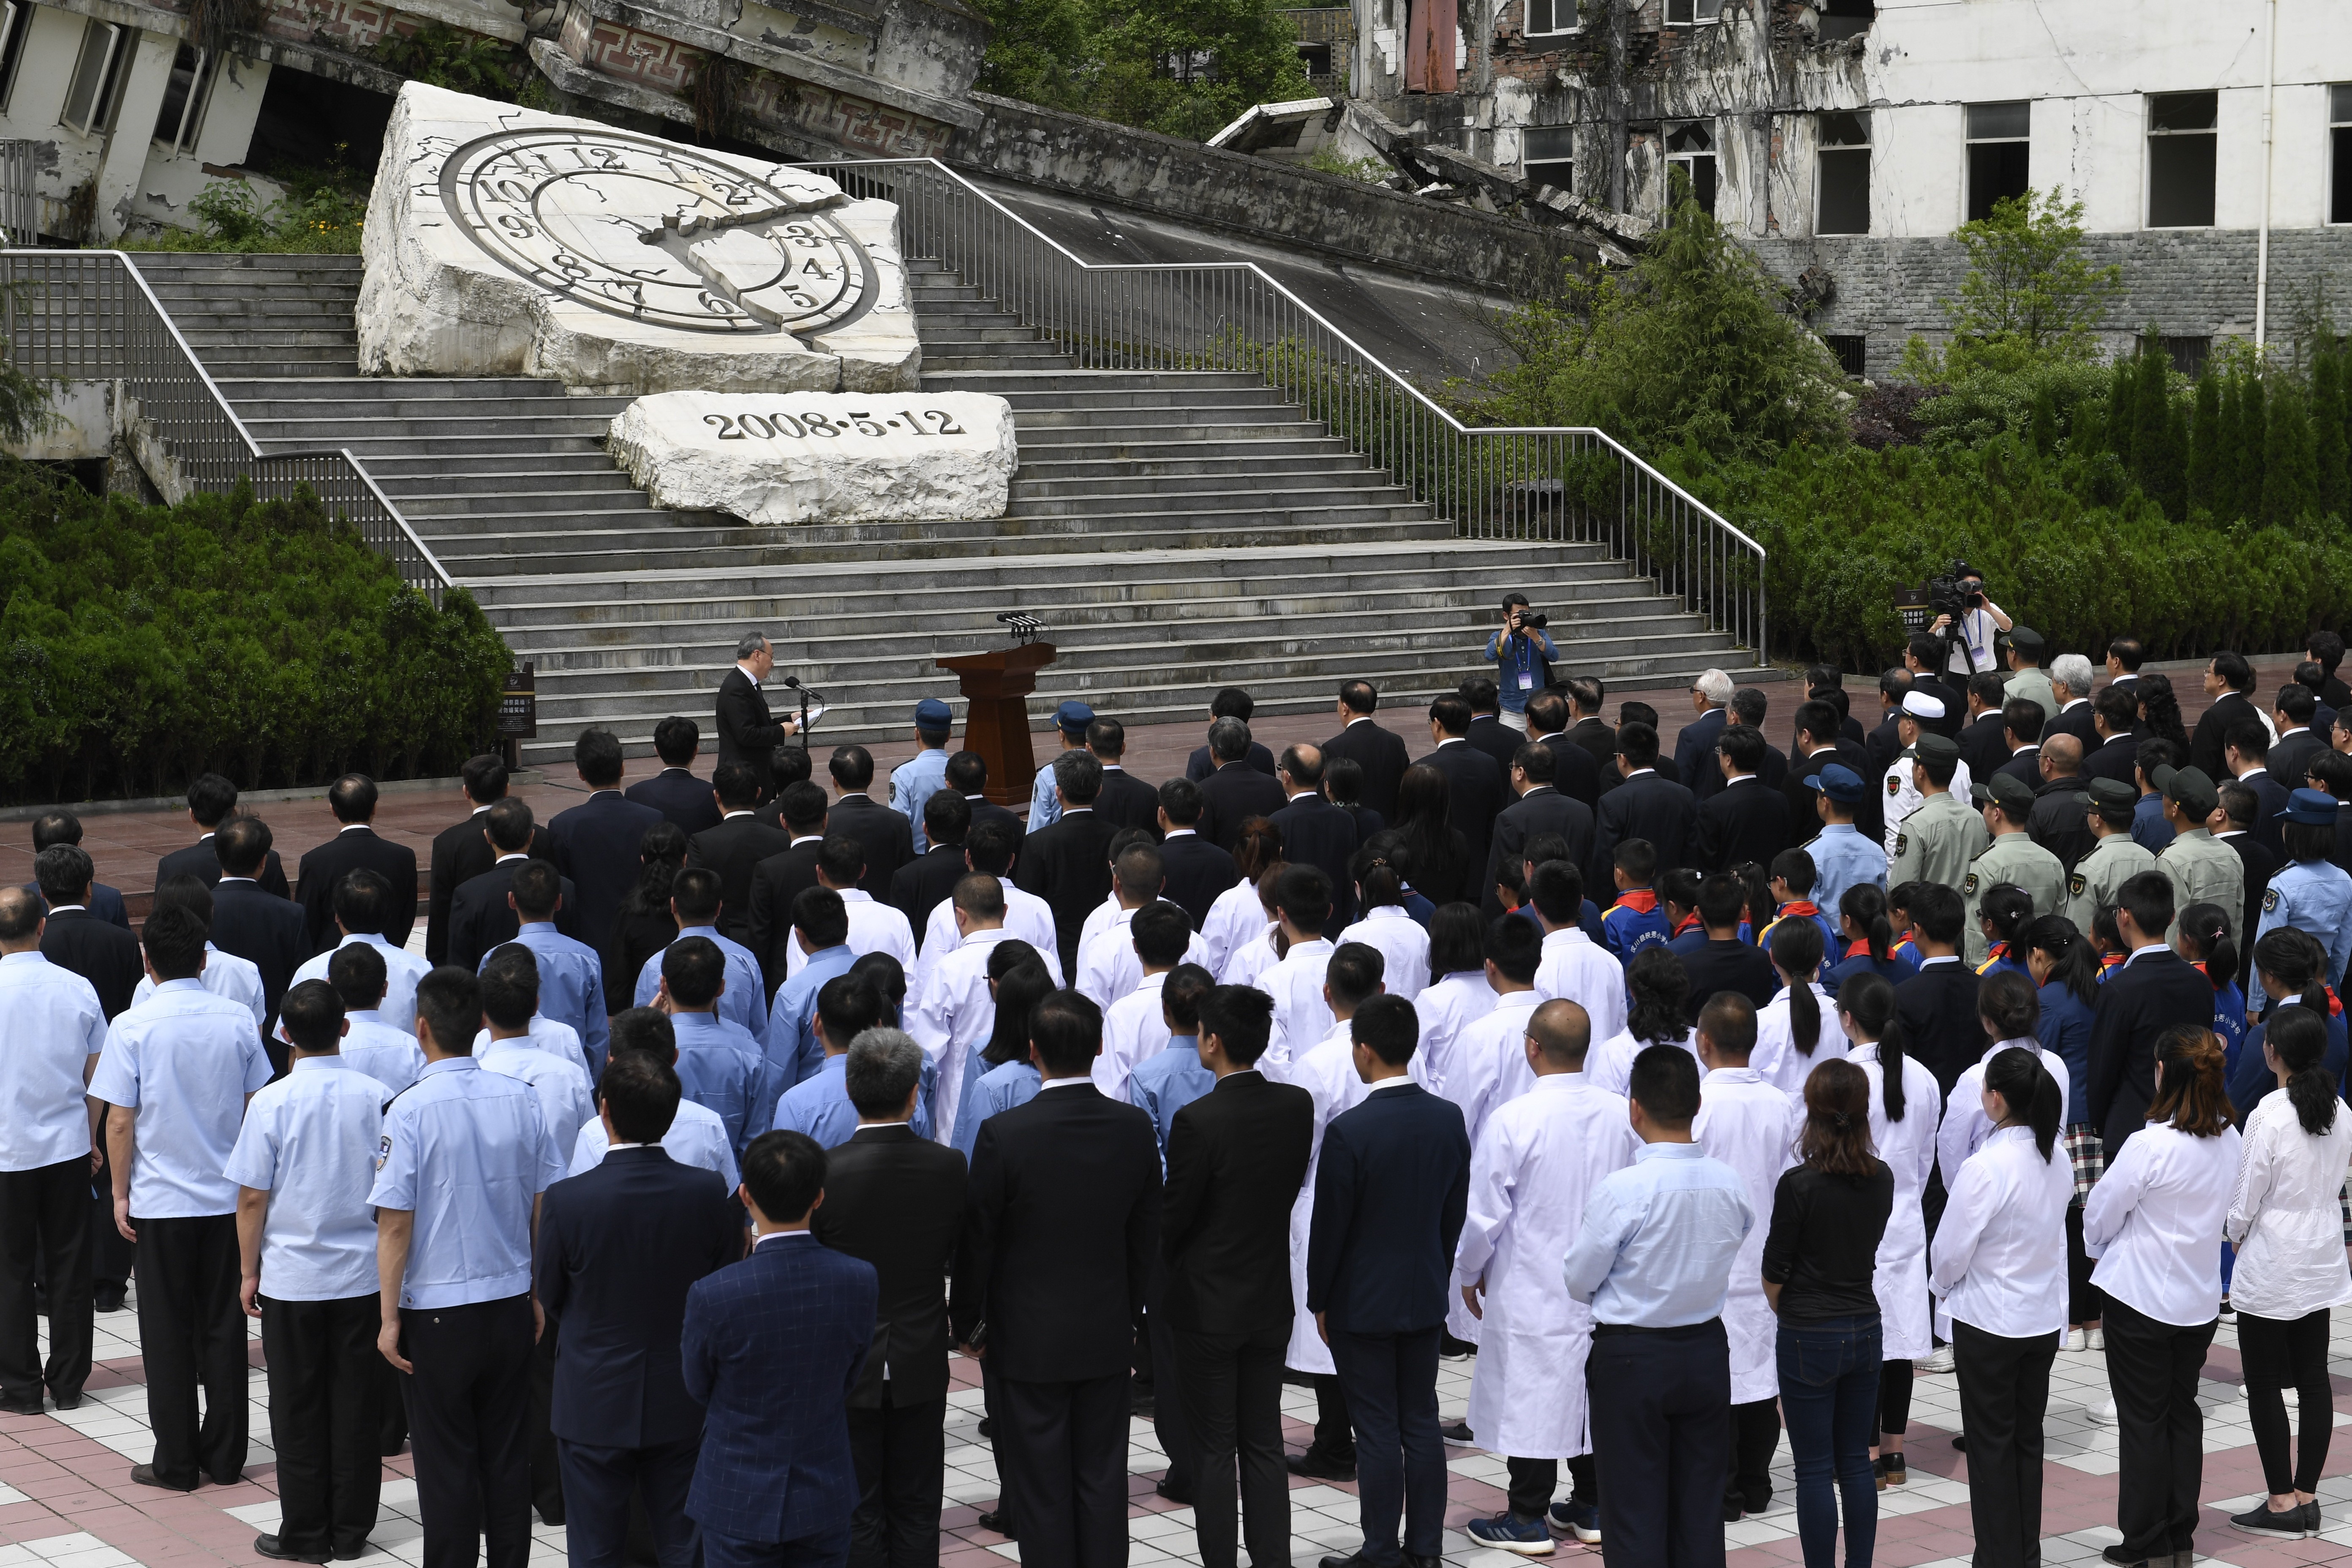 An official ceremony is held outside the Xuankou Middle School, which is now a memorial site where the hands of a broken clock are frozen at 2.28pm – the time the earthquake struck. Photo: Xinhua